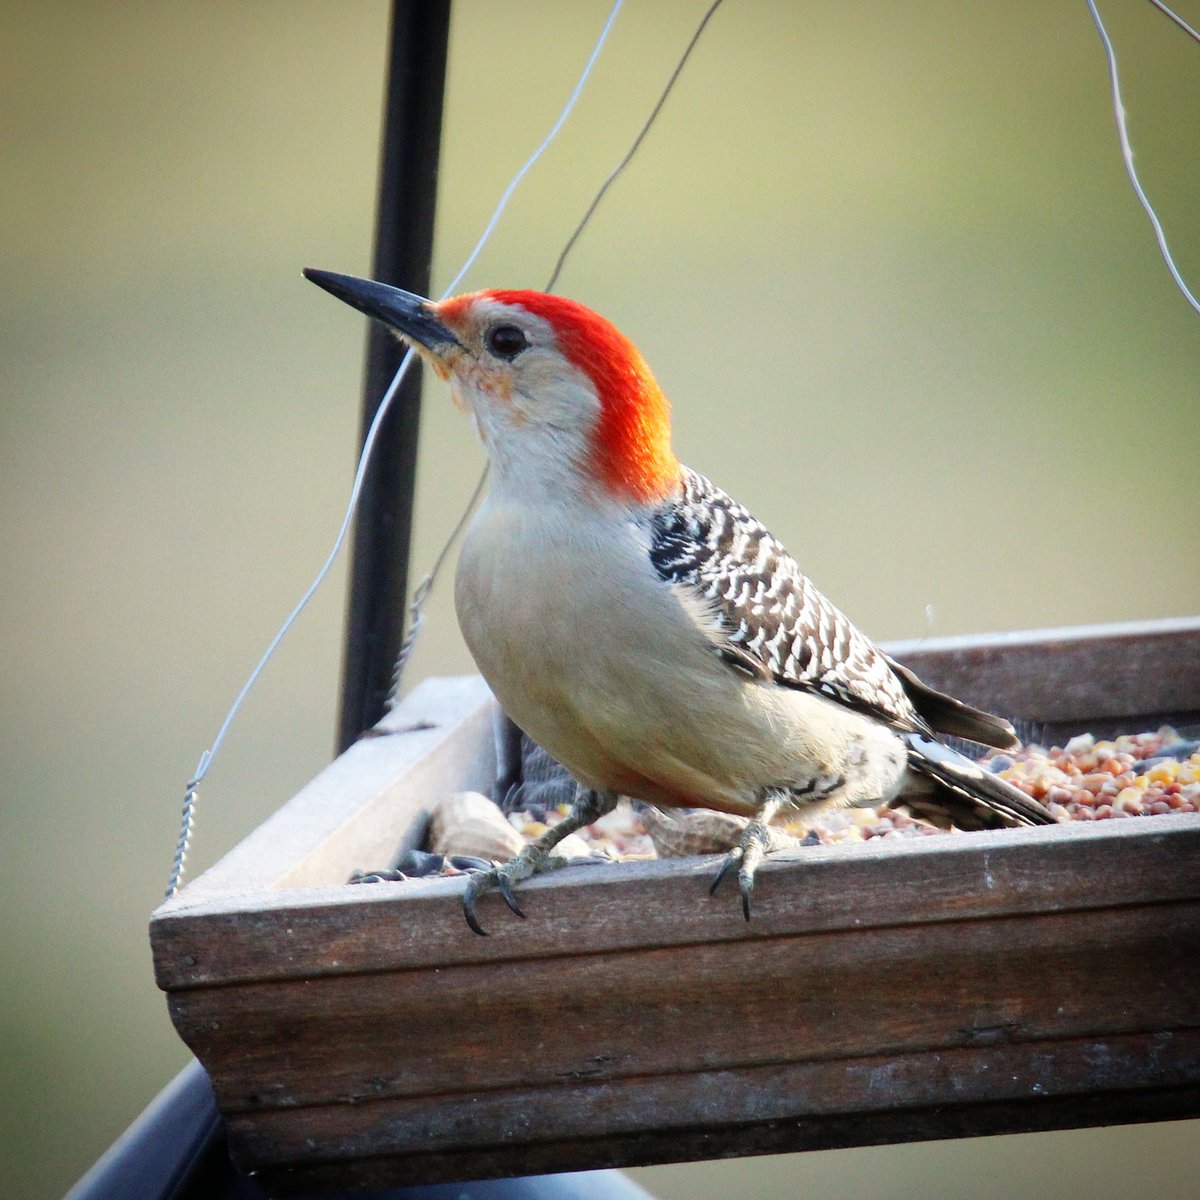 This male red-bellied woodpecker made a brief stop on the tray feeder before hopping onto the suet...
#morningbirding #morningvisit #morningvisitors #morningvisitor #visitor #redbelliedwoodpecker #redbelliedwoodpeckers #birds #woodpecker #woodpeckers #woodpeckerfavorite #birding